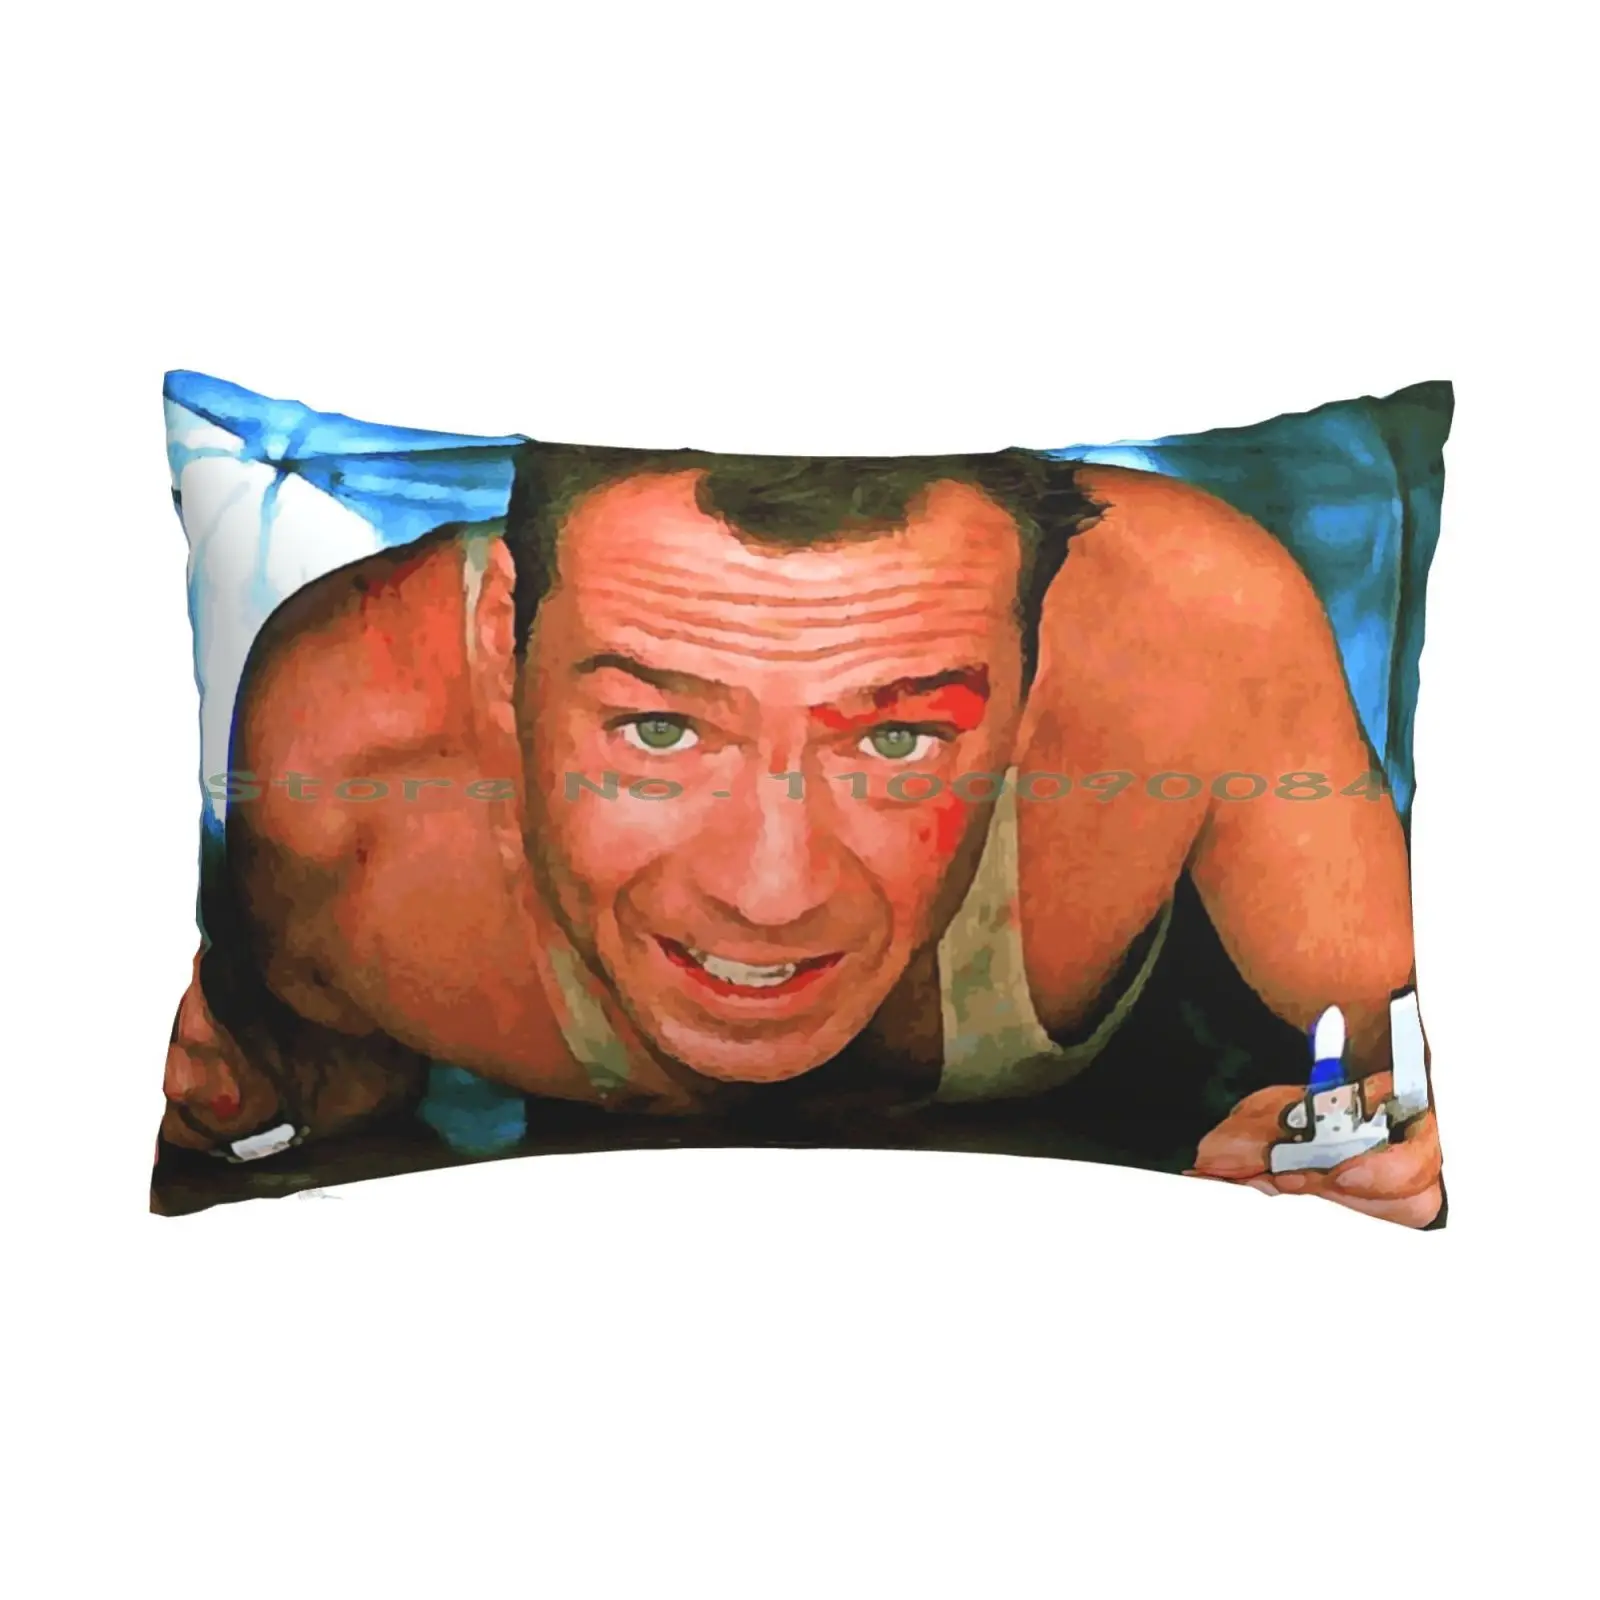 

Come Out To The Coast We'll Get Together Have A Few Laughs.'' Pillow Case 20x30 50*75 Sofa Bedroom Bruce Willis Die Hard Iconic